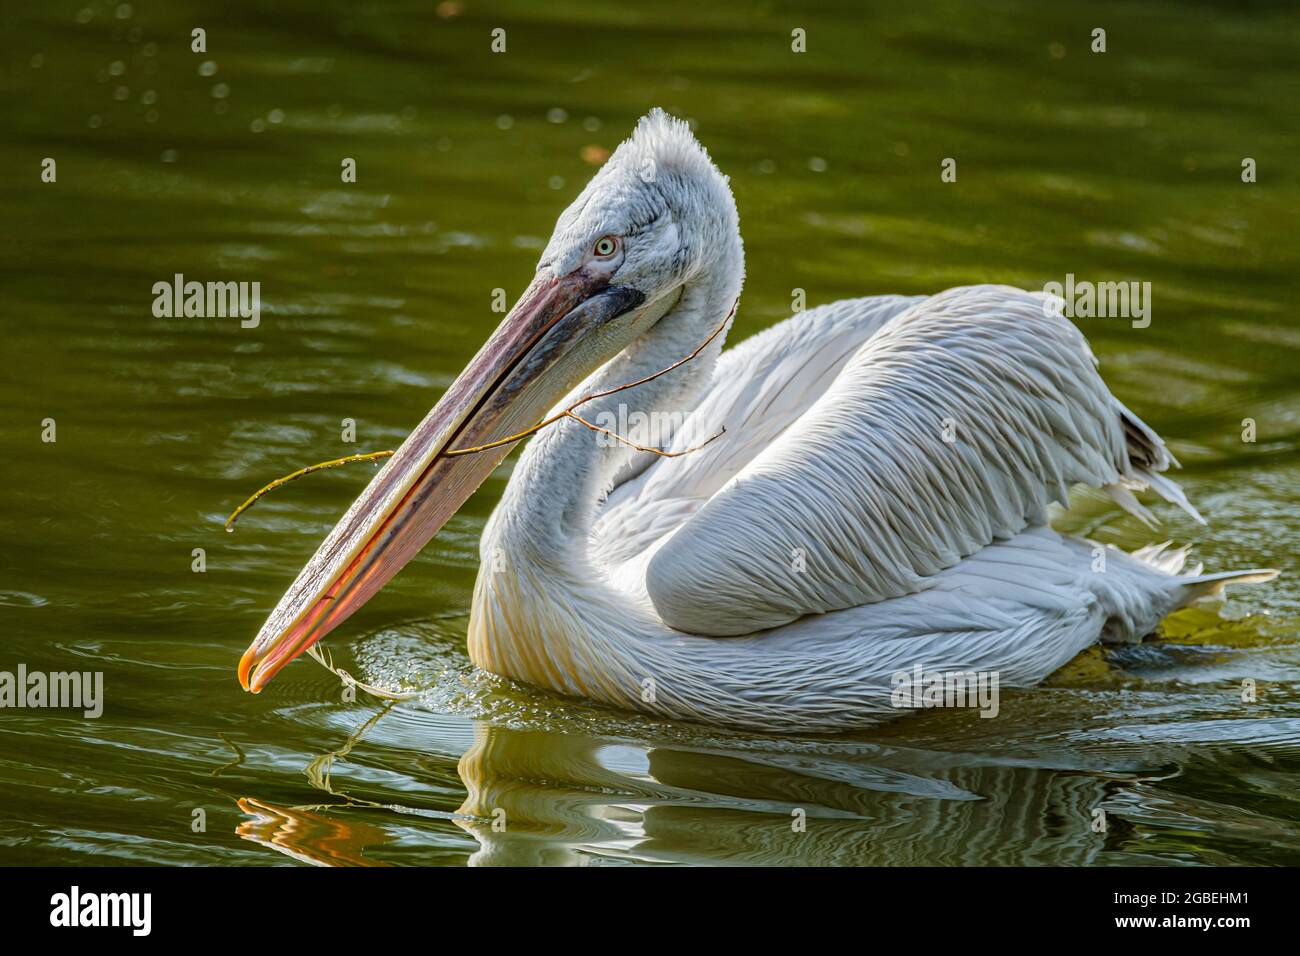 A close up of swimming Dalmatian Pelican with a branch in its beak Stock Photo